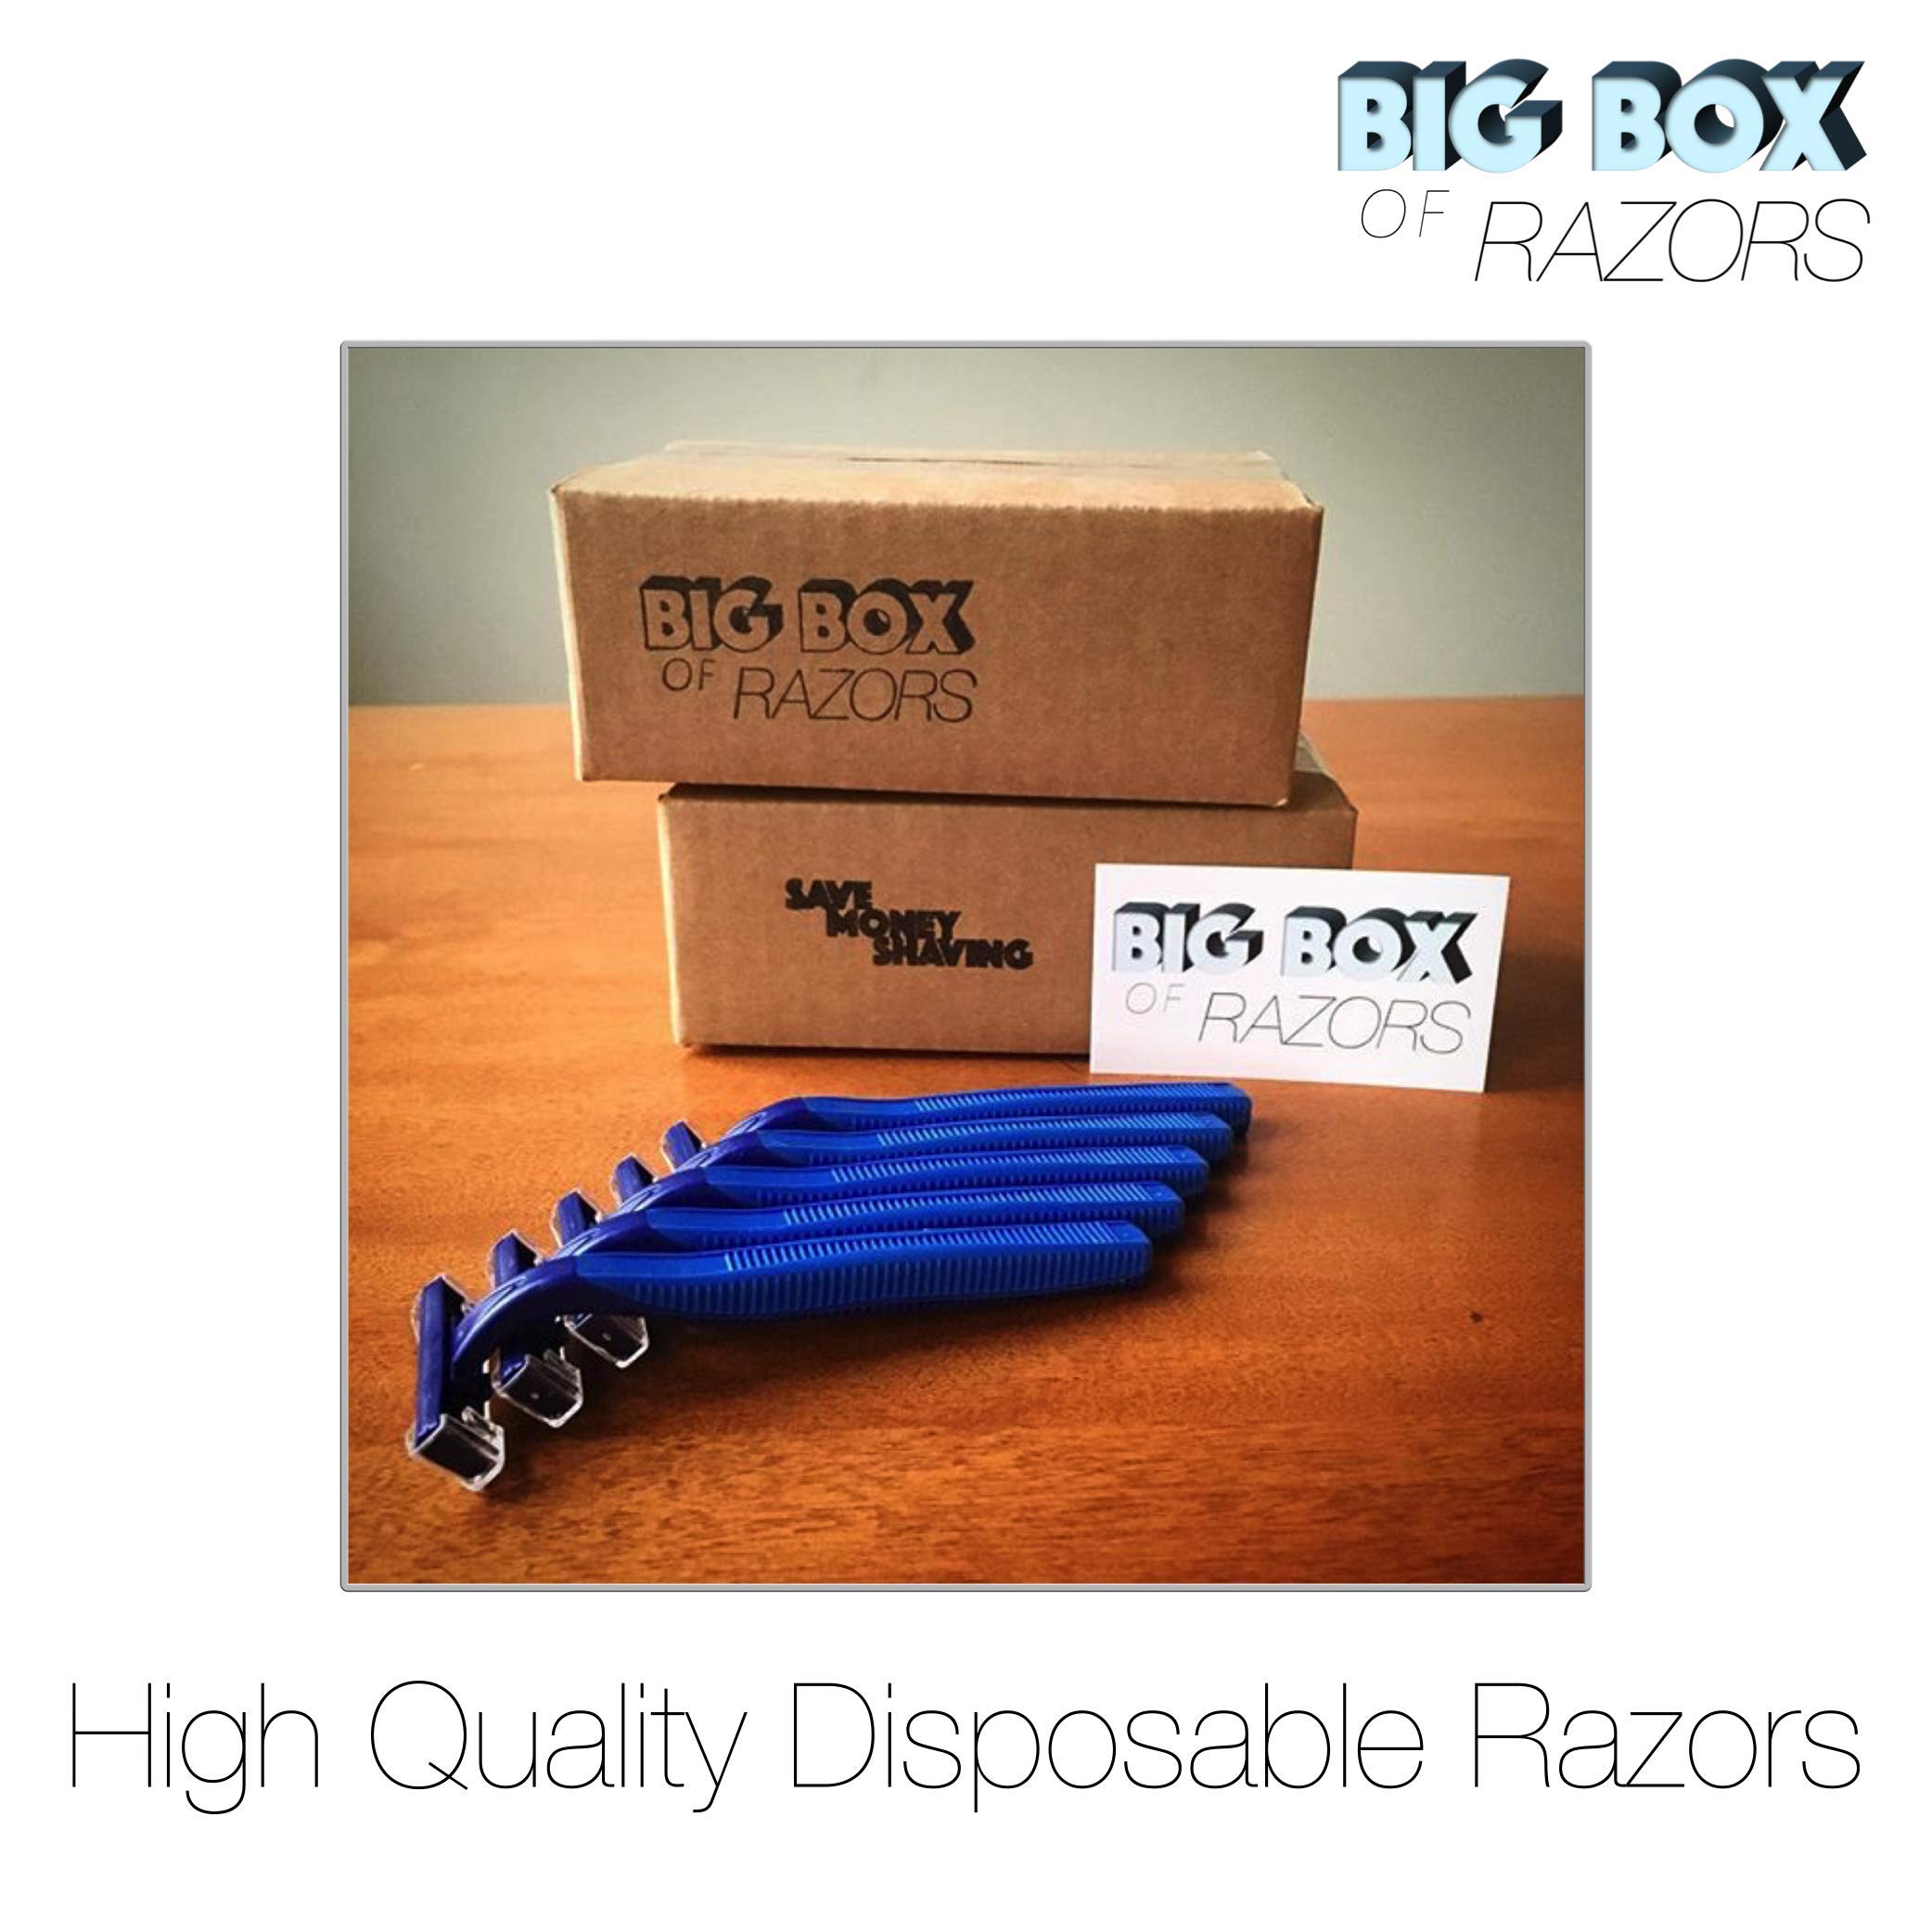 30 Box of Blue Razor Blades Disposable Stainless Steel Hospitality Quality Shavers High End Twin Blade Razors for Men and Women with Aloe Vera Lubrication Strip